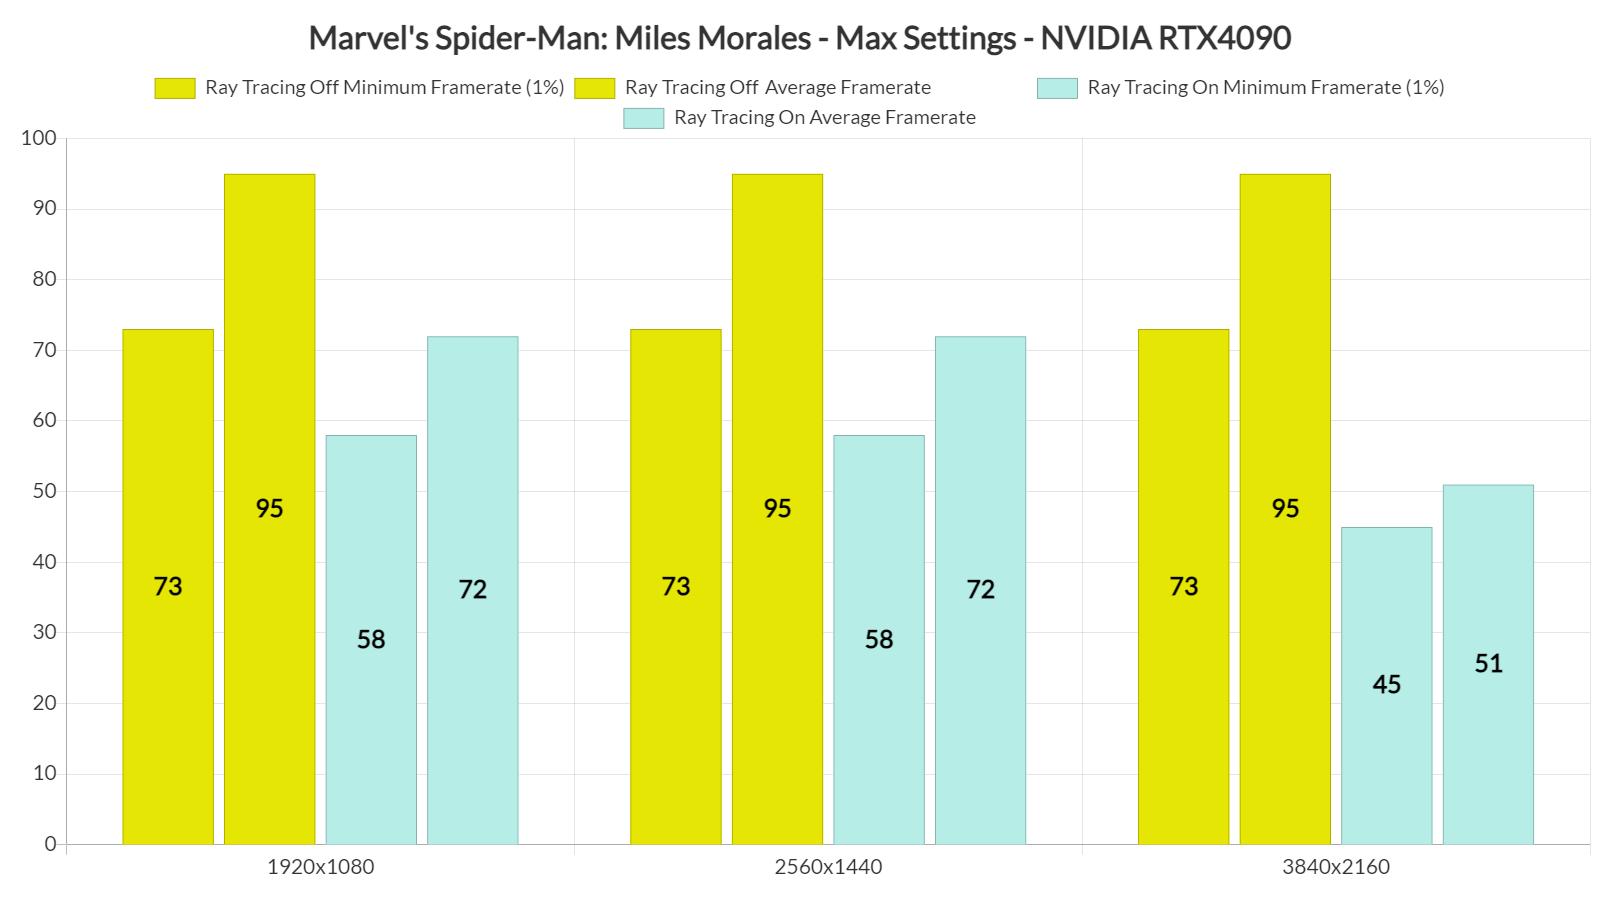 Marvel's Spider-Man Miles Morales Ray Tracing benchmarks